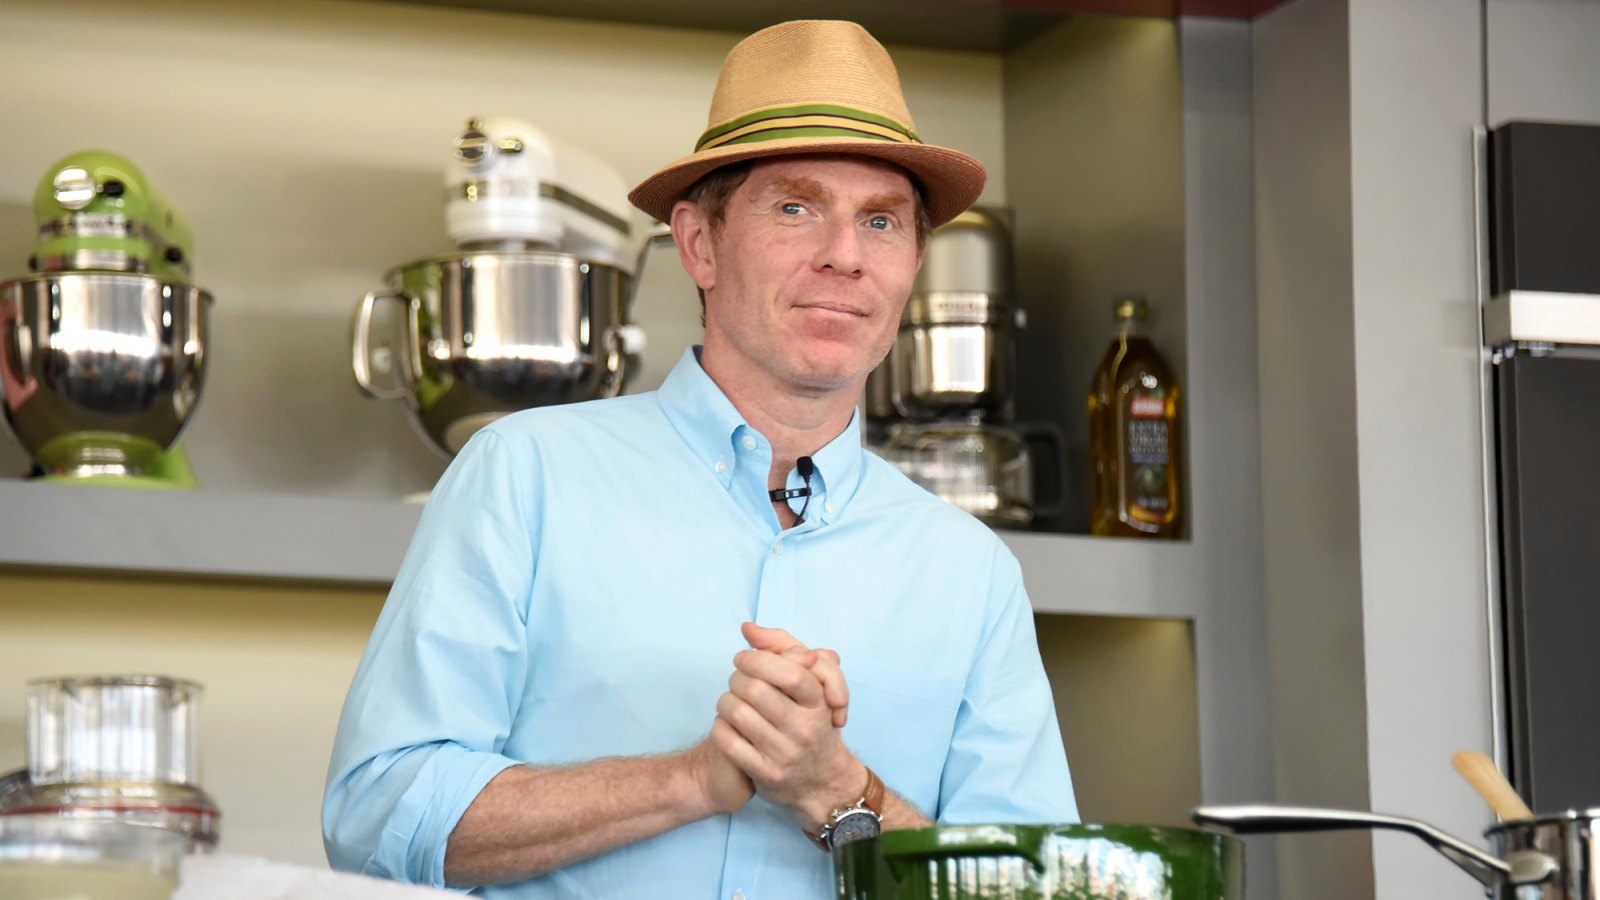 Bobby Flay Is Leaving the Food Network After 27 Years: Report